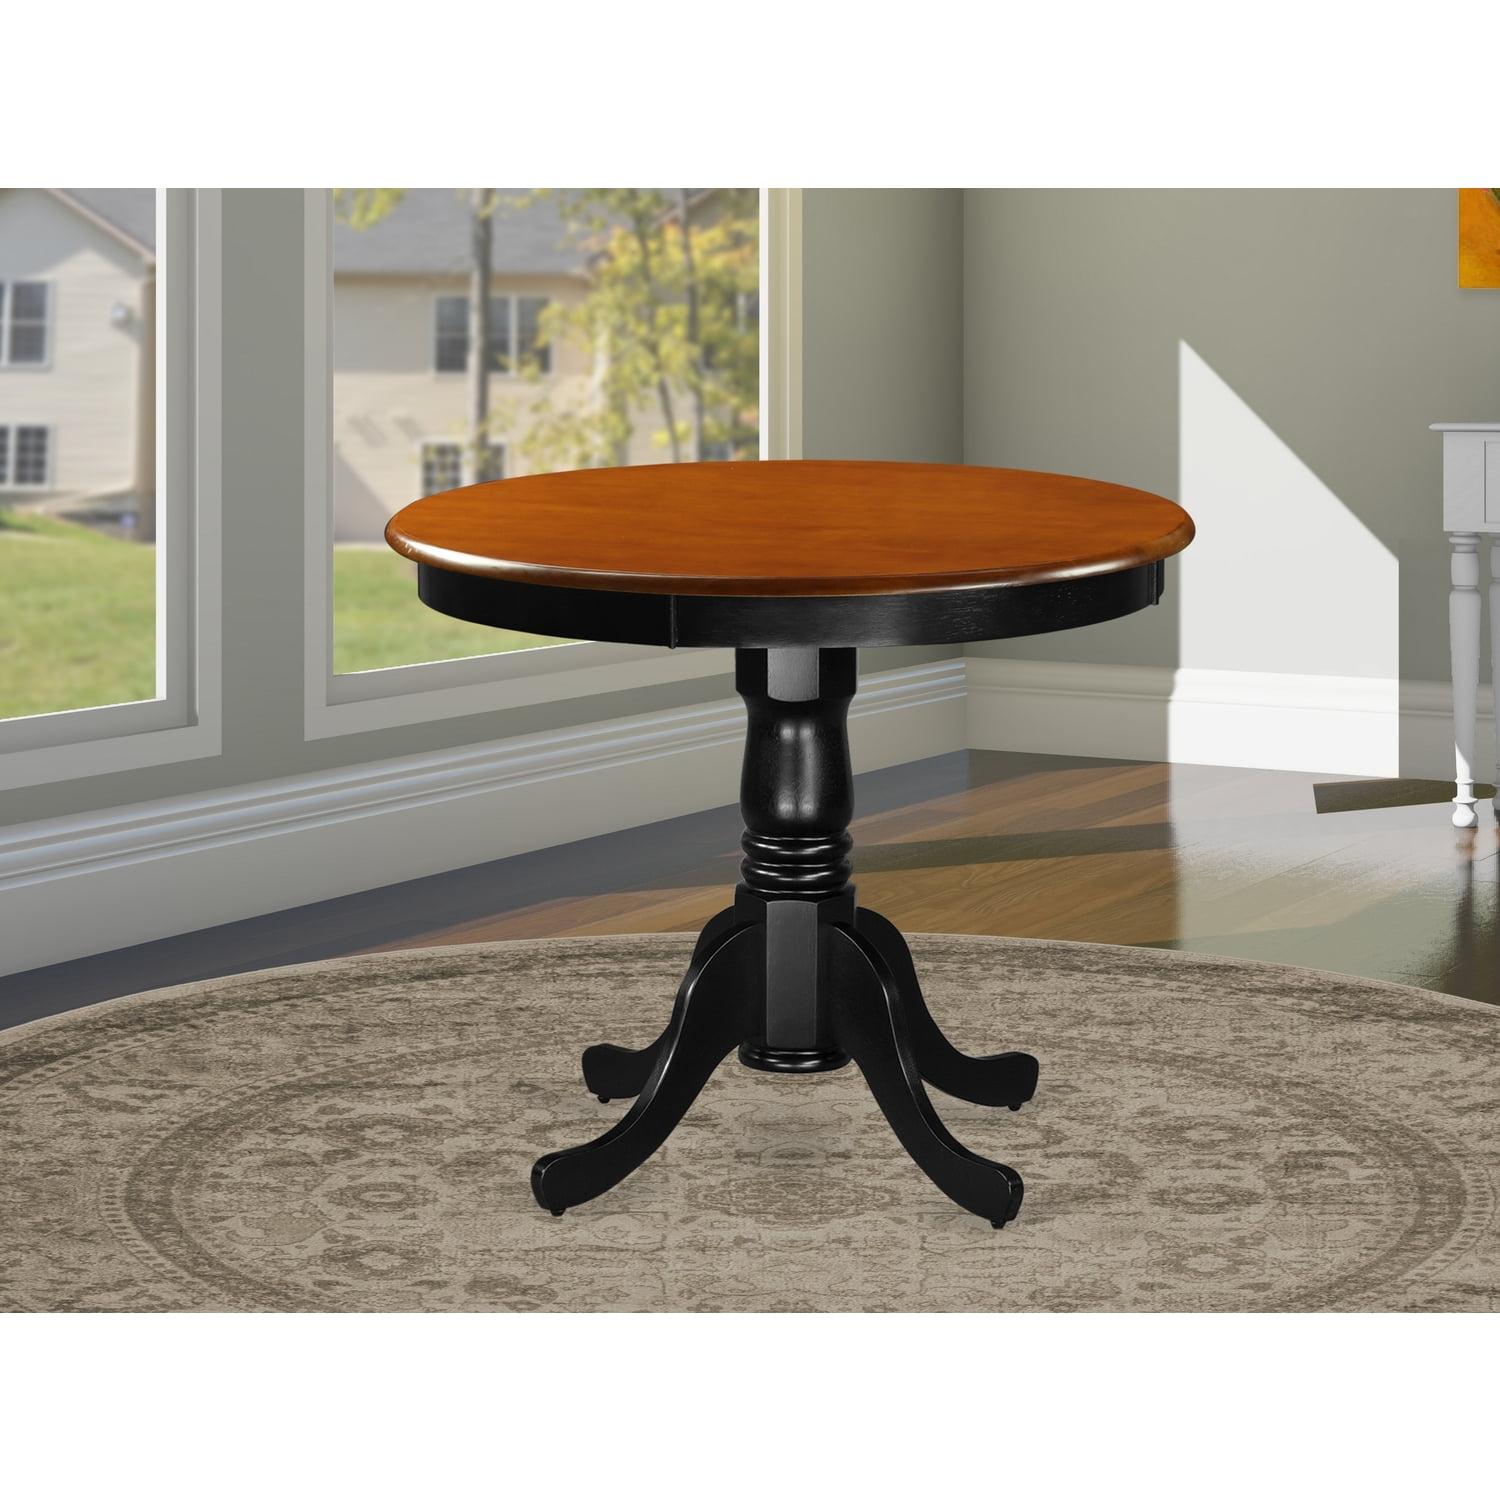 East West Furniture Antique 36 Inch Pedestal Round Dining Table, Cherry ...